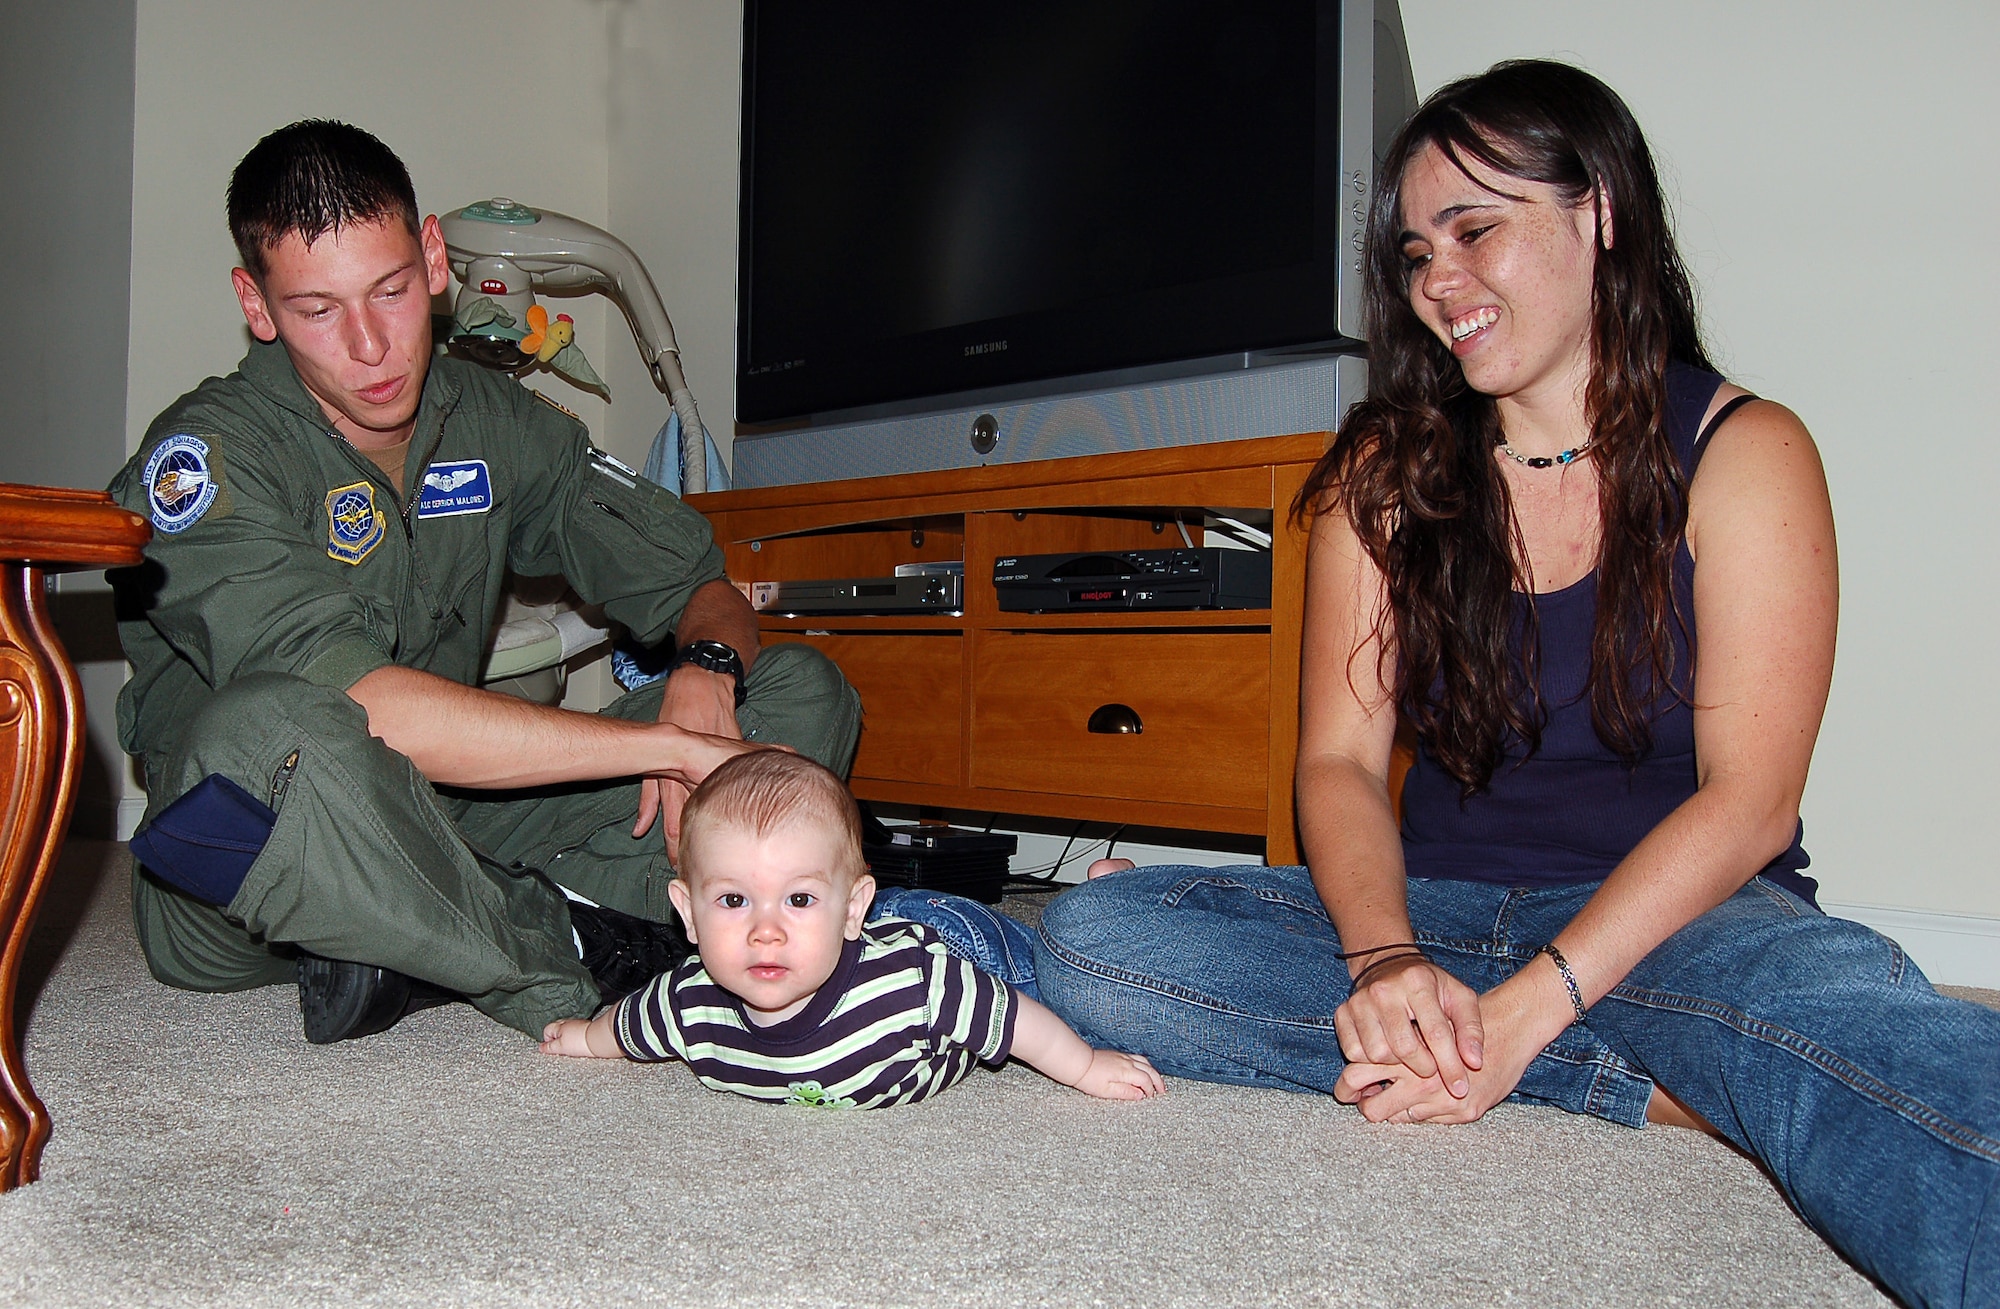 Airman 1st Class Derrick Maloney and his wife Jeema play with their 6-month-old son, Tyler, at their home in North Charleston, S.C., prior to his C-17 Globemaster III training mission Oct. 26. Airman Maloney is a loadmaster with the 17th Airlift Squadron. (U.S. Air Force photo/Tech. Sgt. Ben Gonzales)